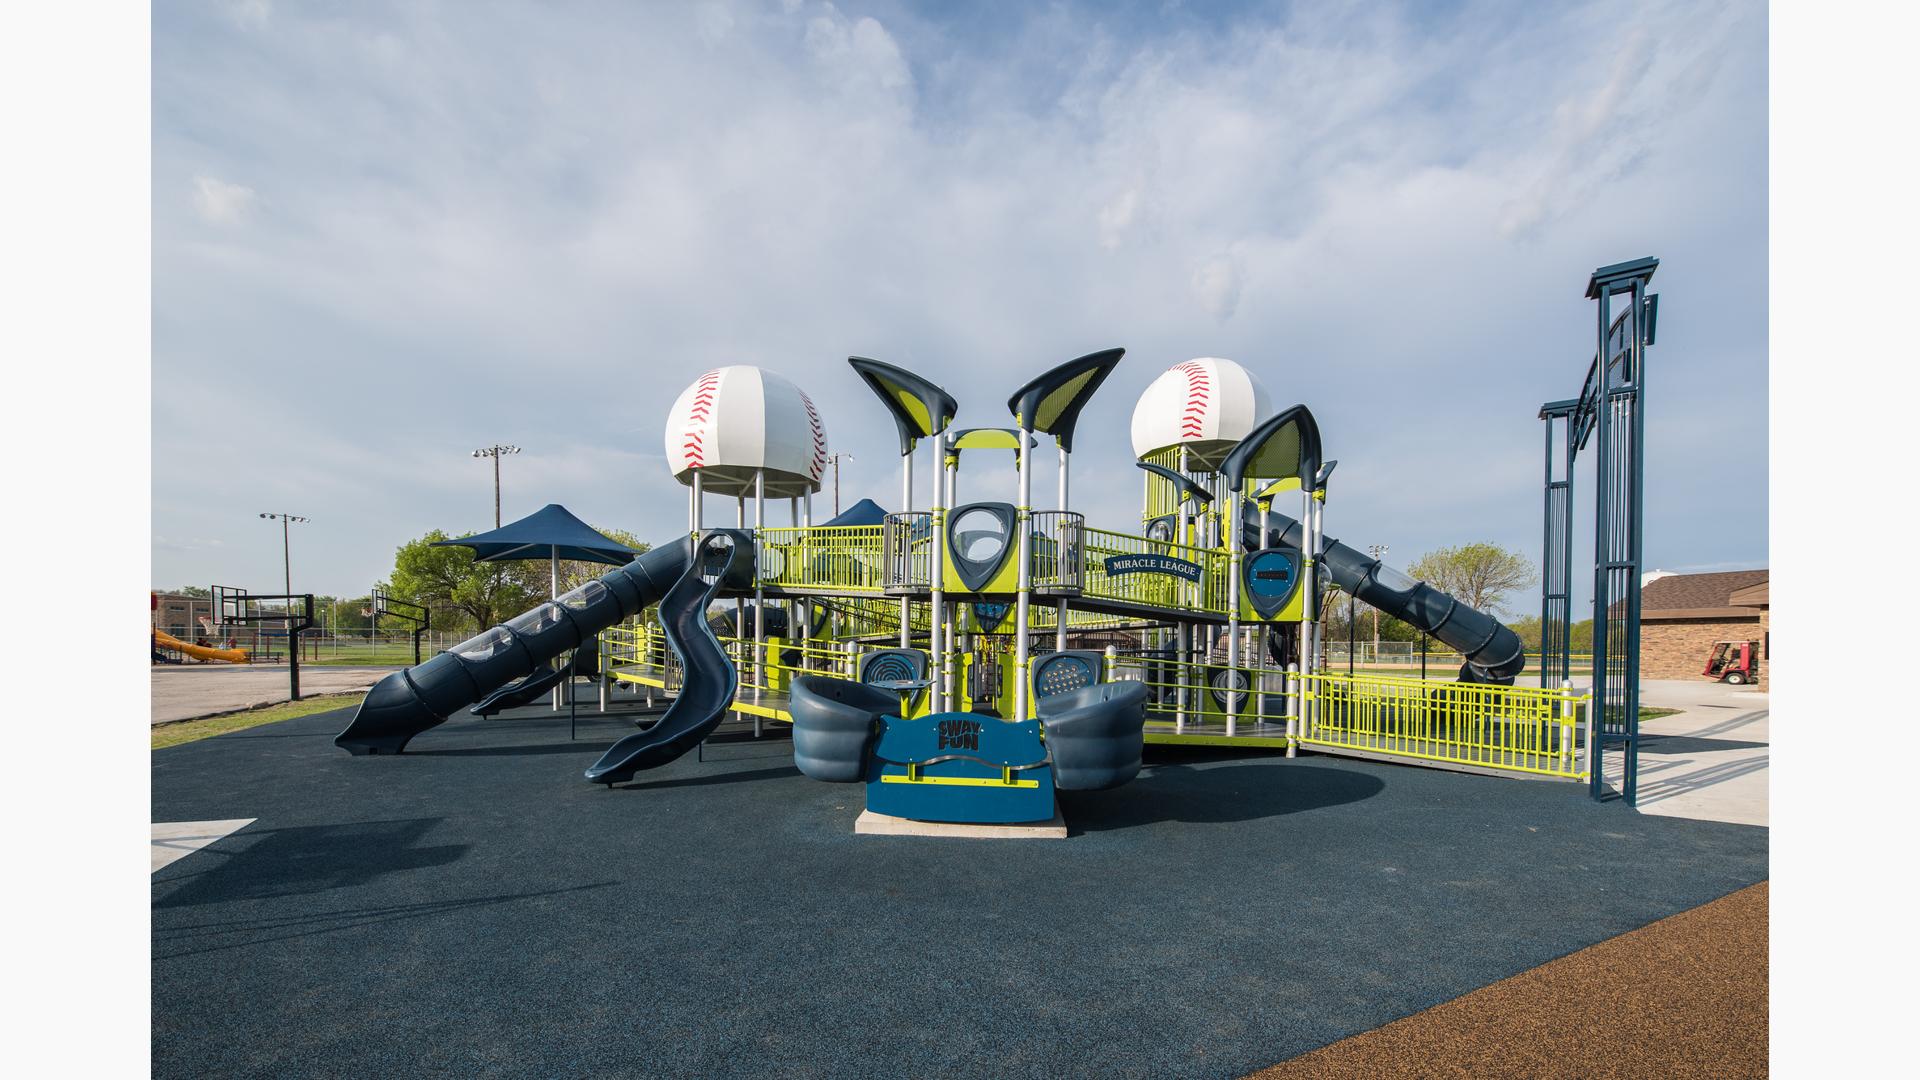 Green, blue and silver playground with 2 baseball dome roofs. Ramps and tall blue slides. Basketball courts in background.